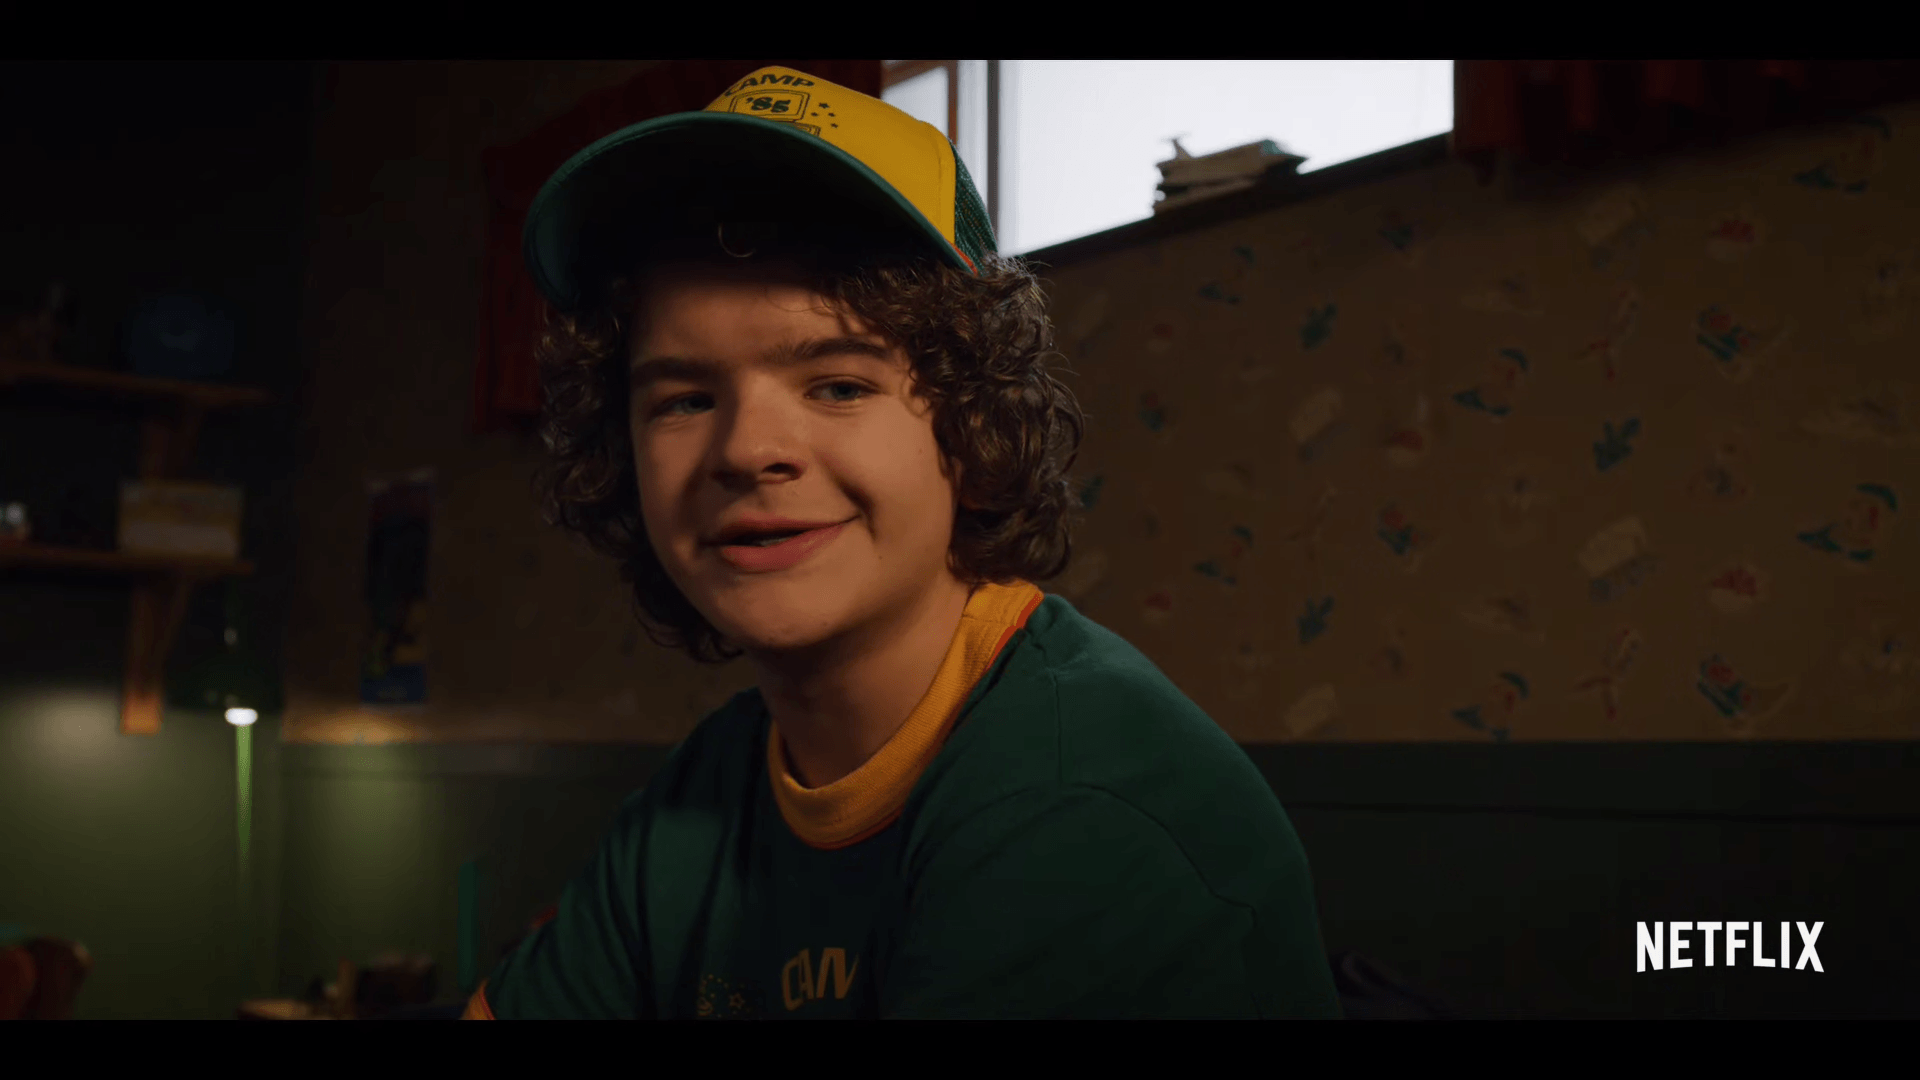 The Official For Stranger Things Season 3 Just Dropped